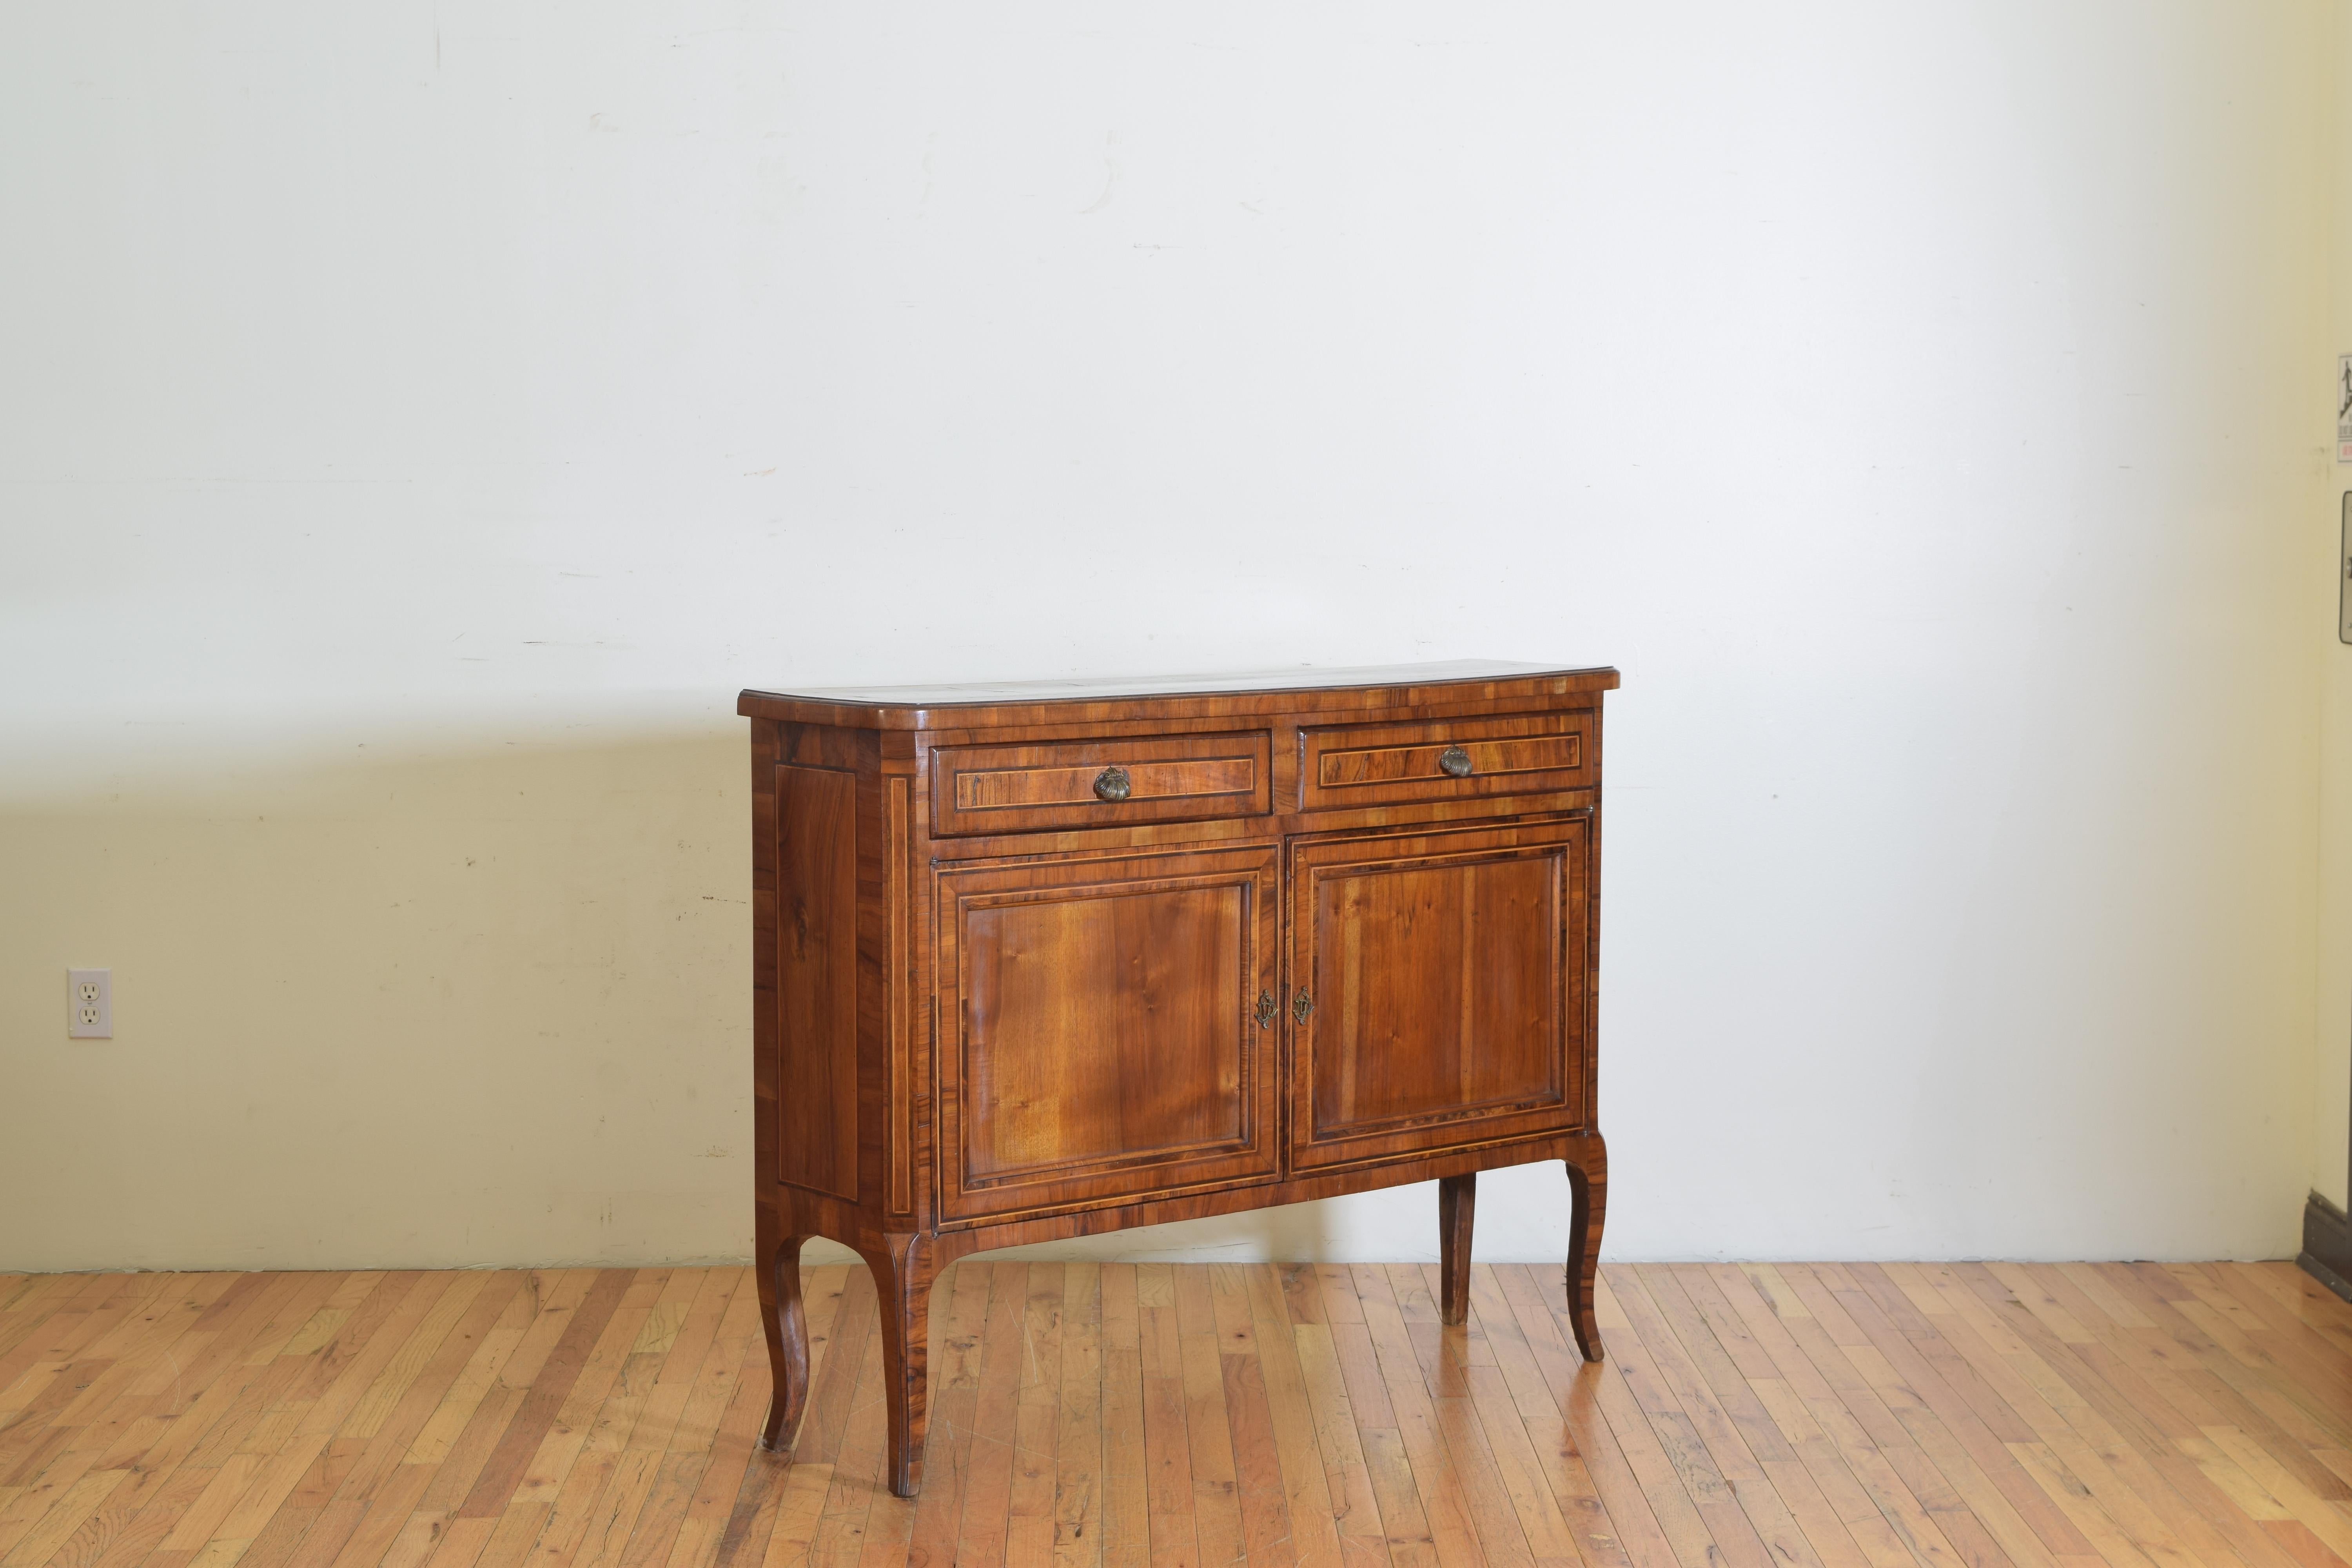 Having a rectangular top with rounded front edges above a conforming case housing two drawers over two doors, the credenza covered in walnut and mixed wood veneers, with bronze hardware, raised on flared legs.